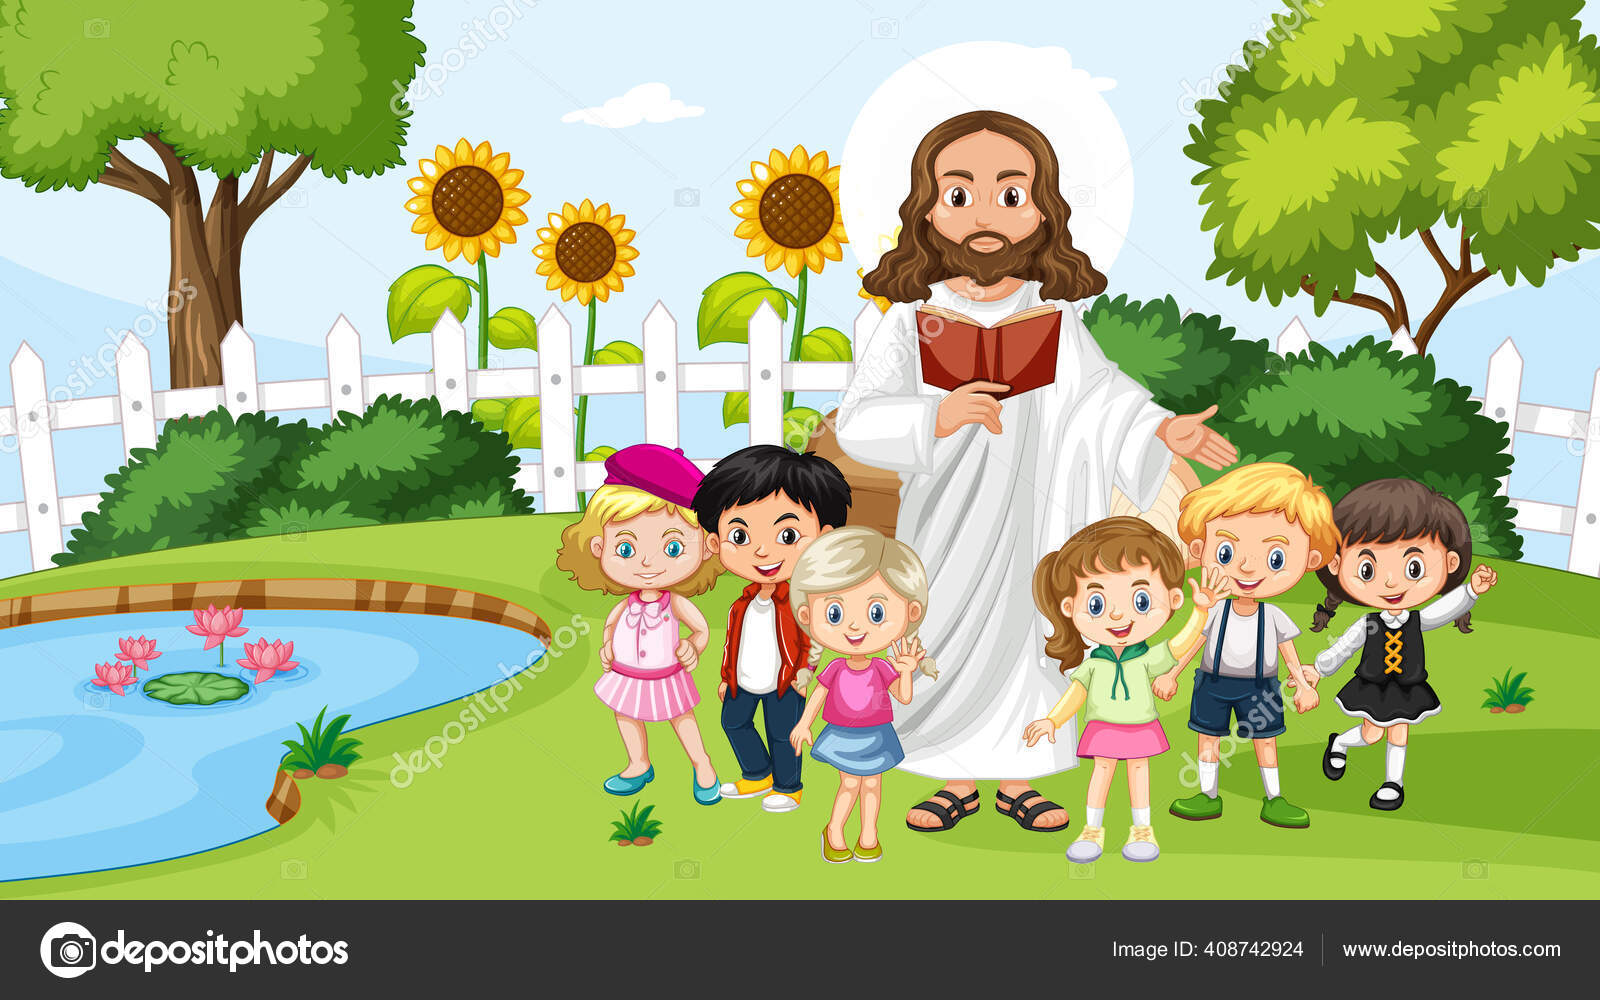 Jesus with children in the park illustration